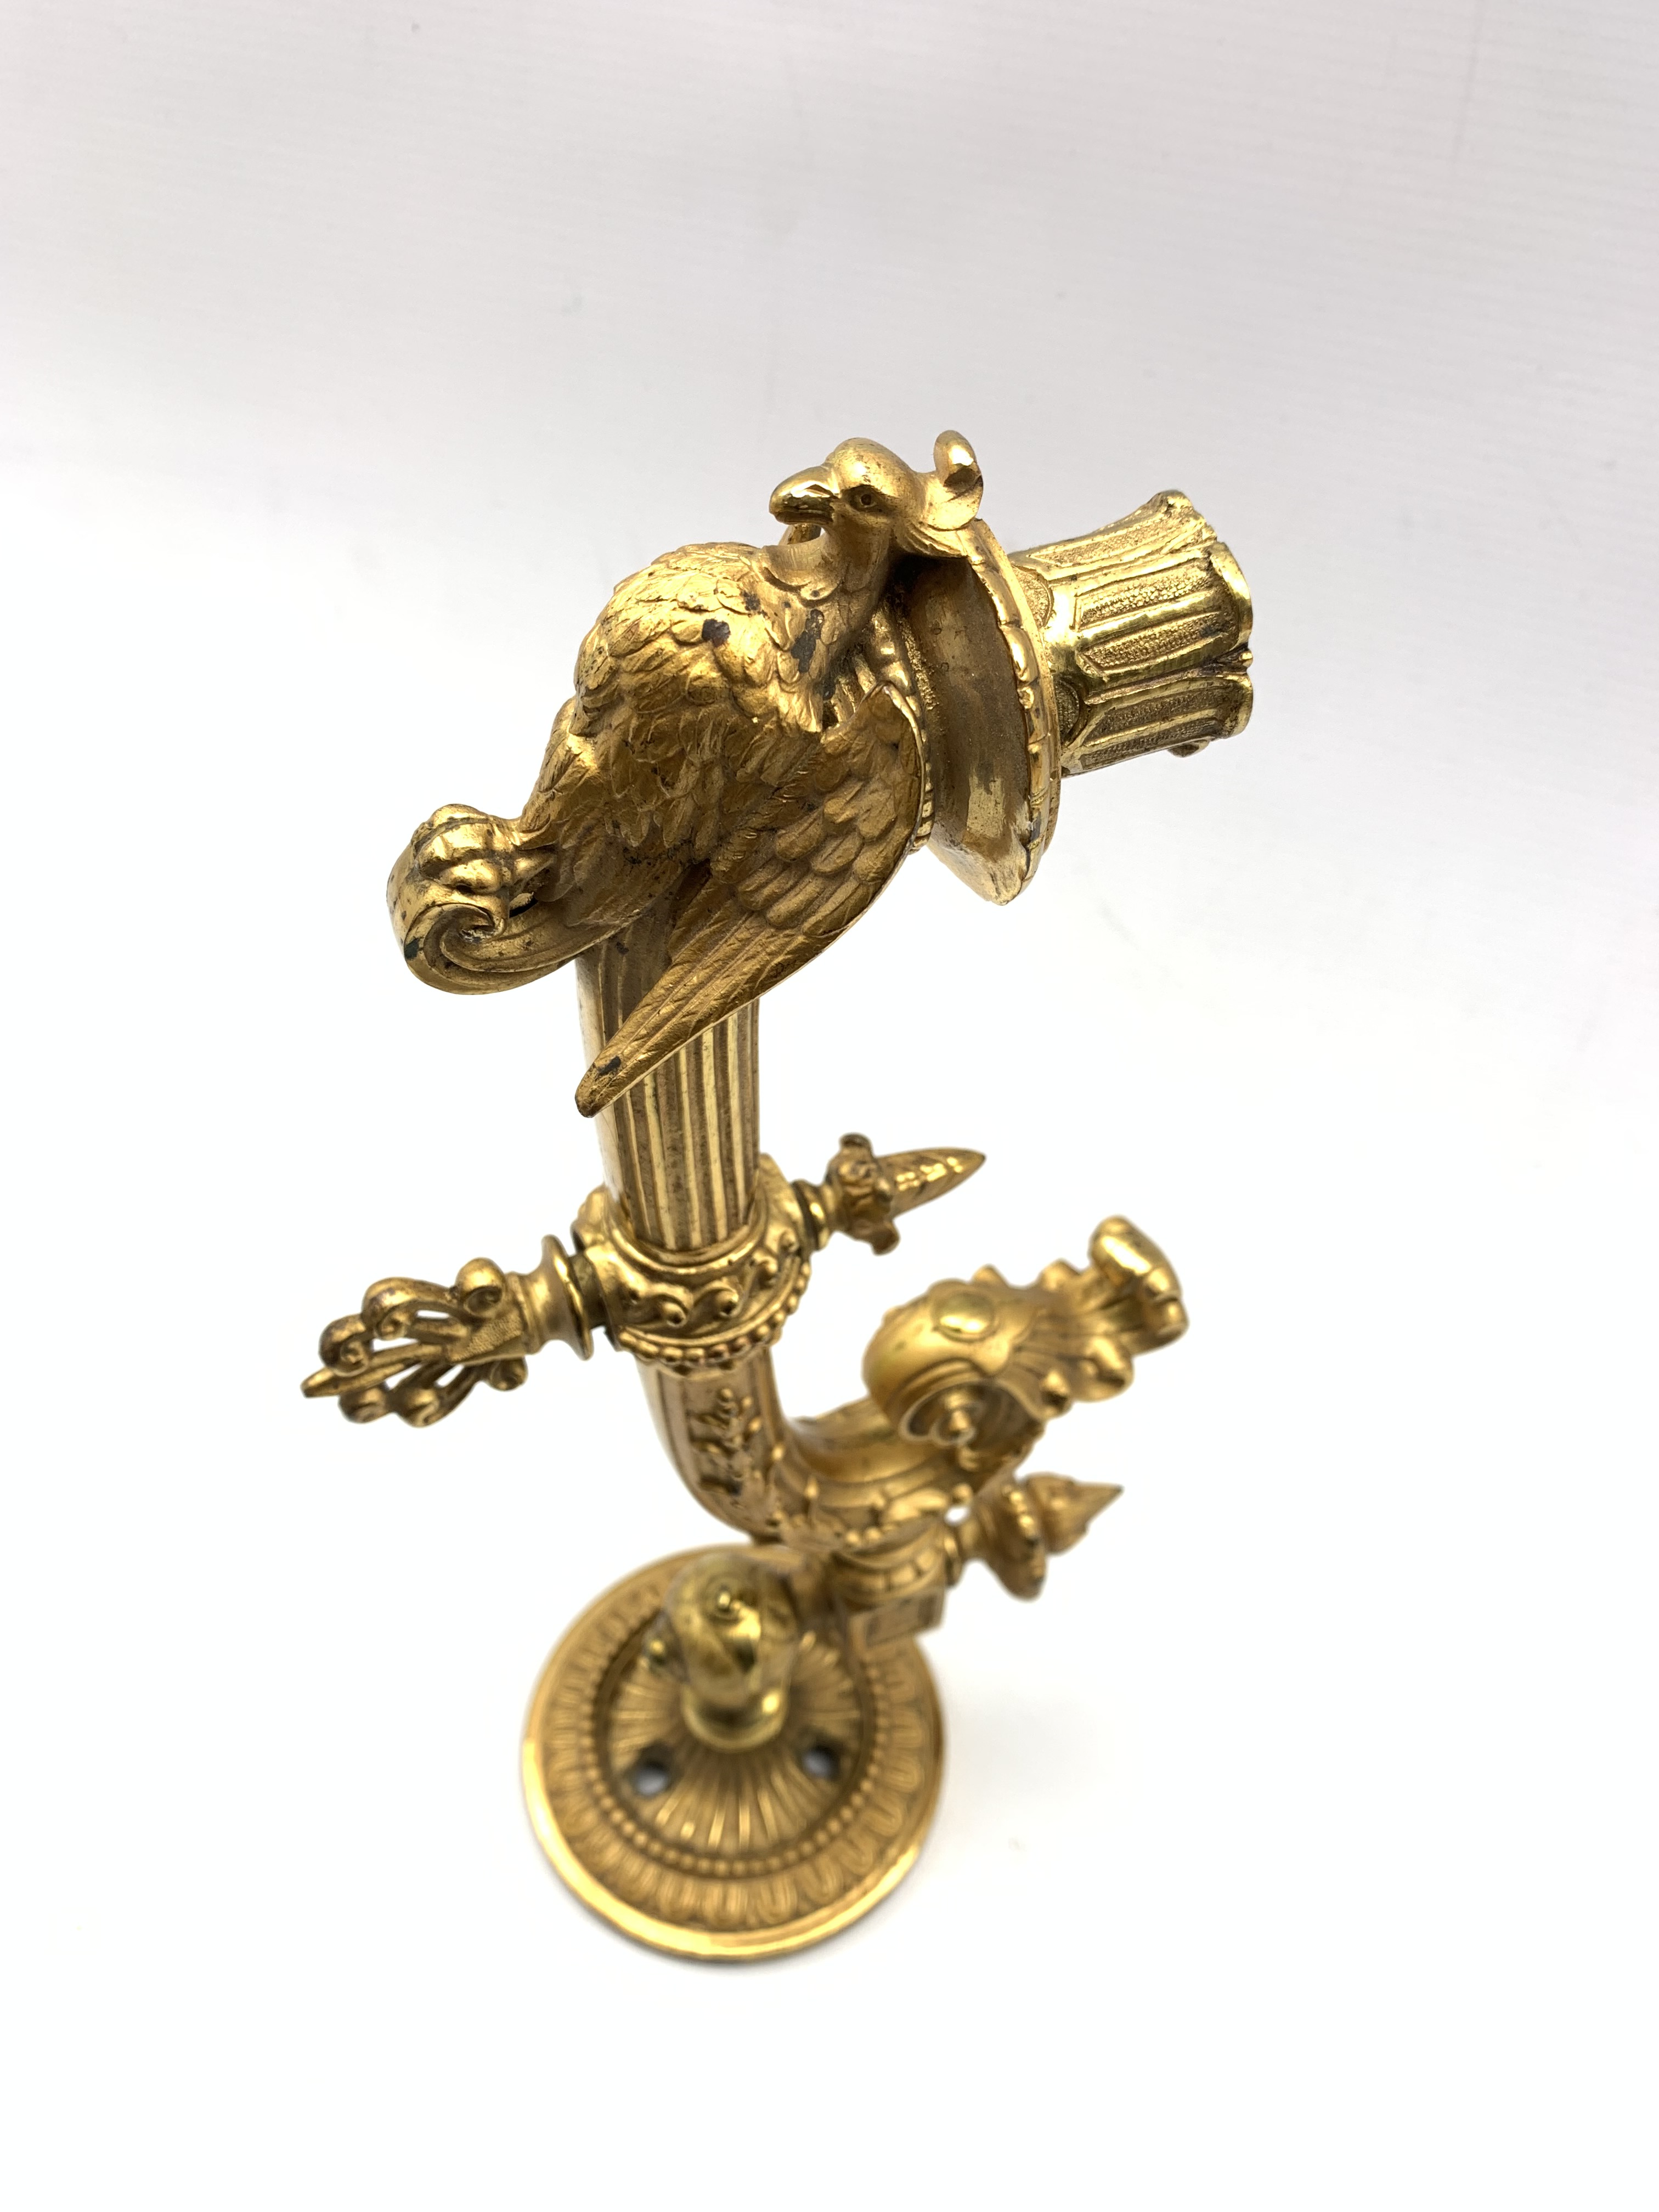 19th century gilt metal gas wall sconce with swivel plate, eagle, shell and scroll decoration L32cm, - Image 5 of 5